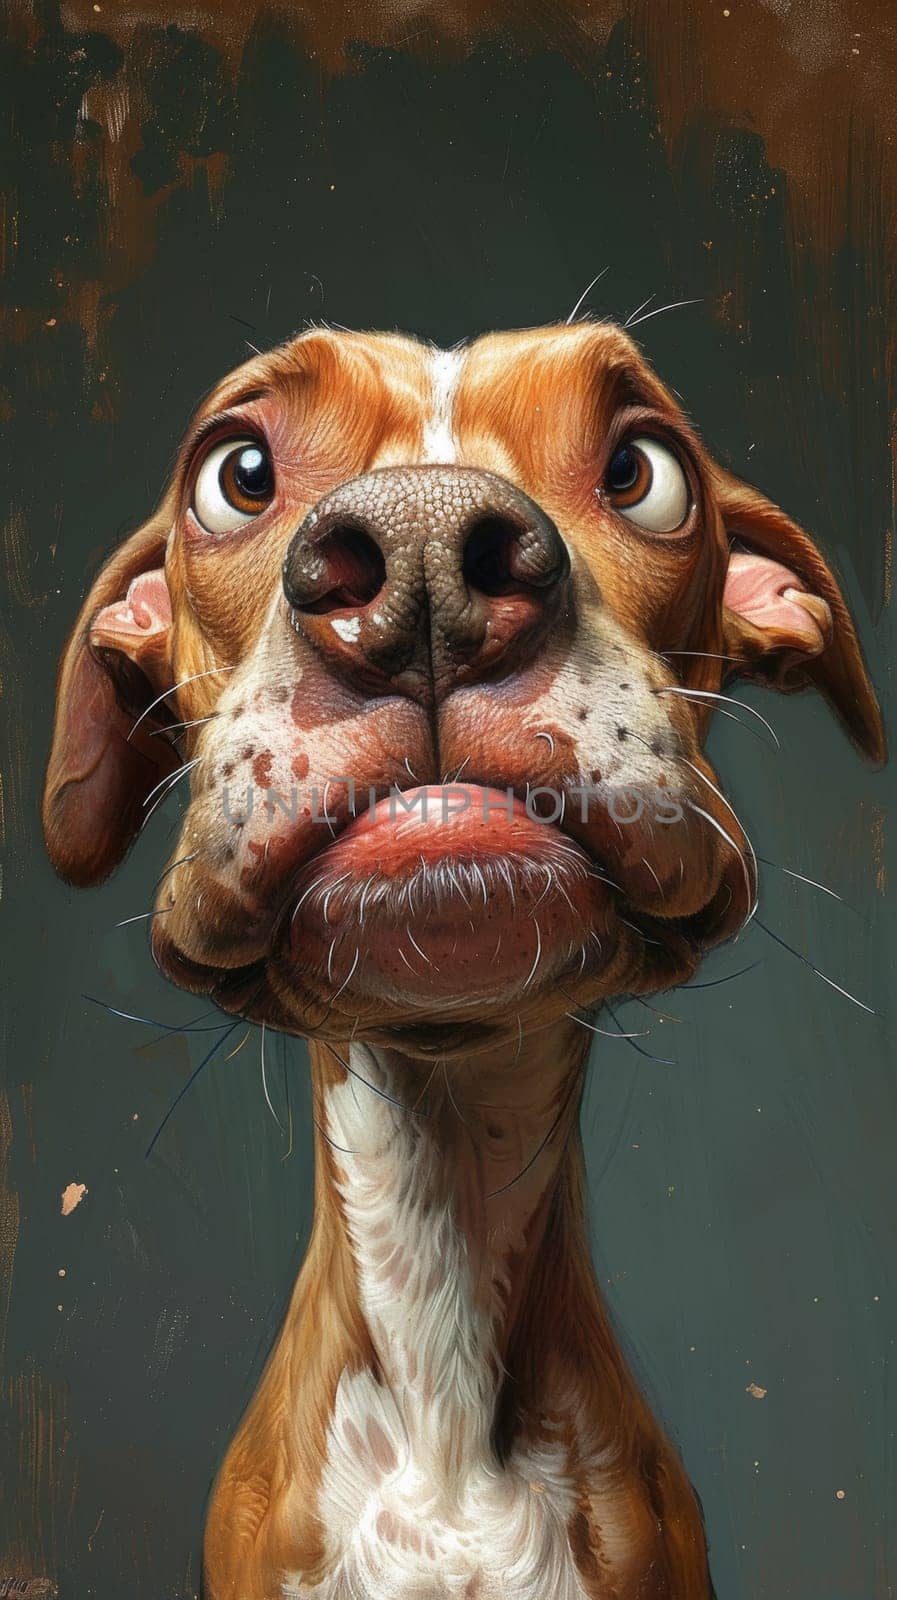 A close up of a dog looking at the camera with his mouth open